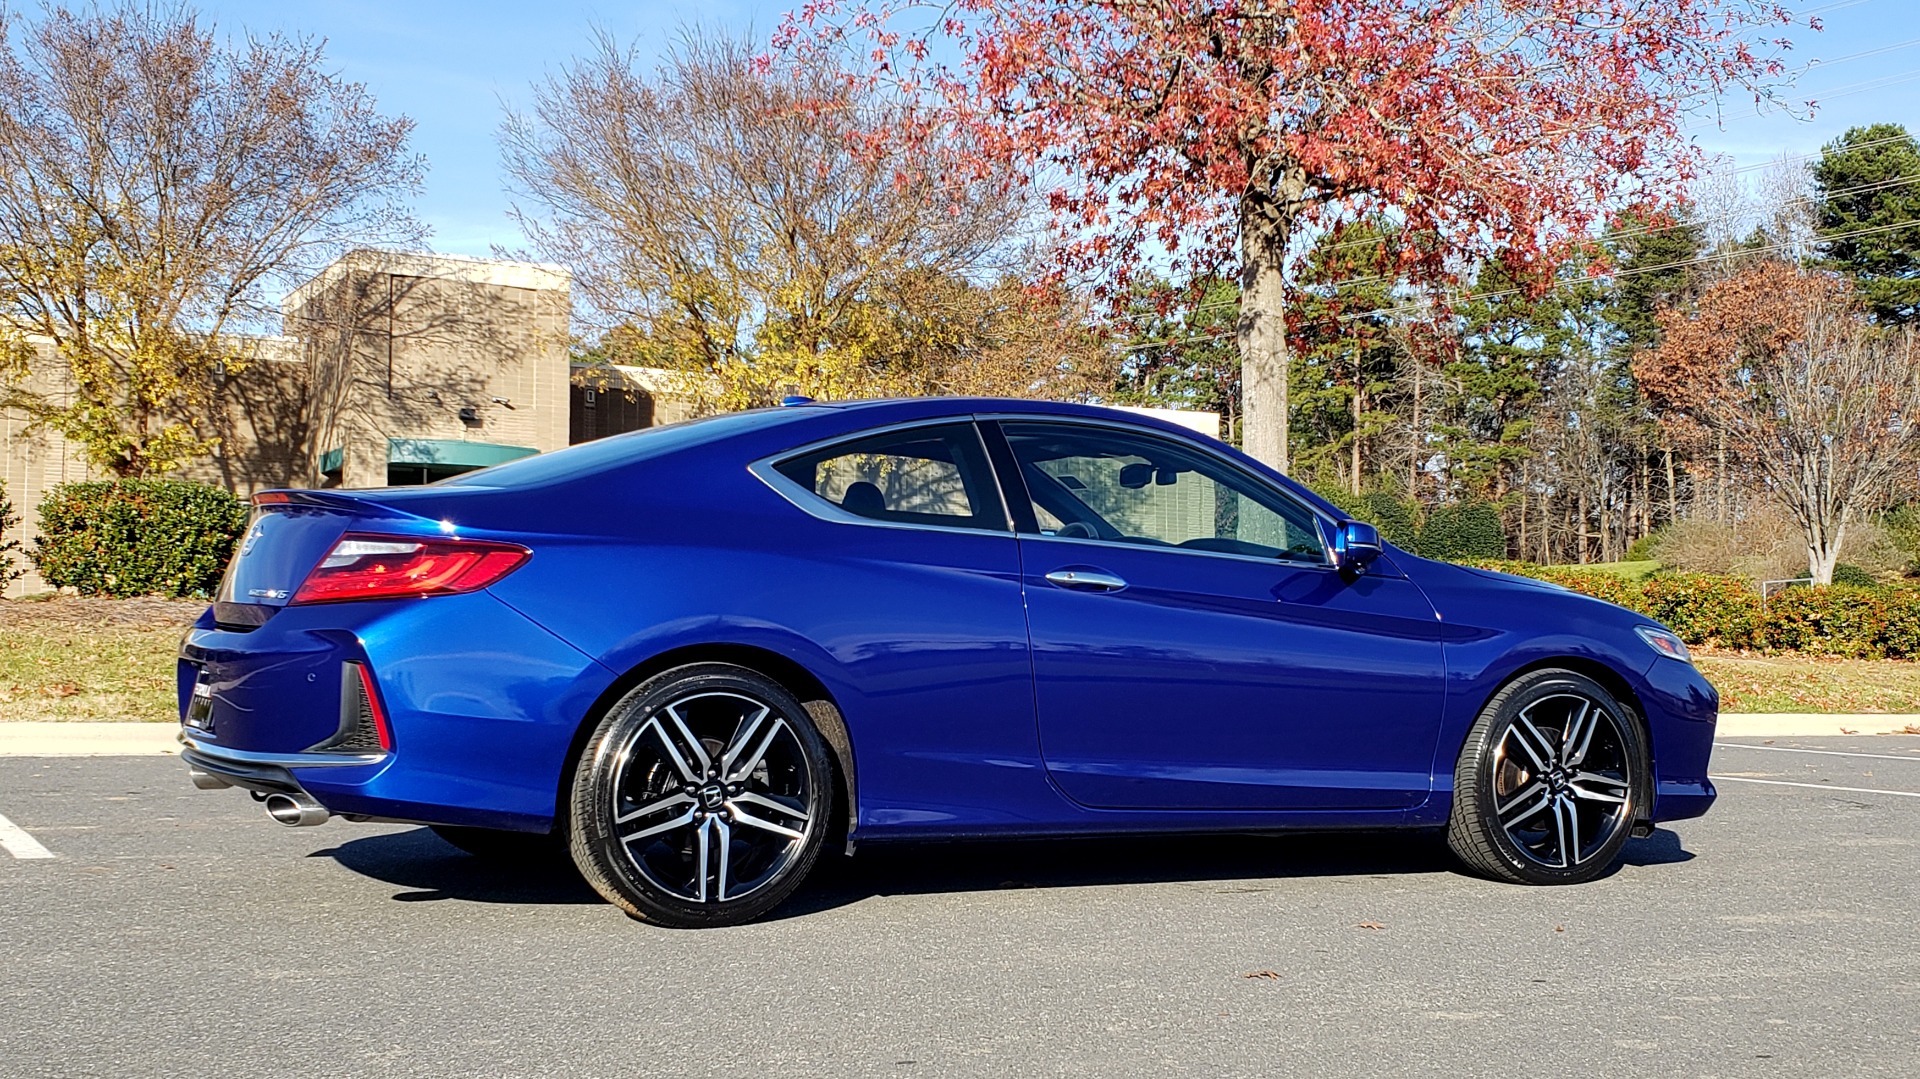 Used 2017 Honda ACCORD COUPE TOURING V6 / 2-DR / NAV / SUNROOF / LANEWATCH / CMBS for sale Sold at Formula Imports in Charlotte NC 28227 9